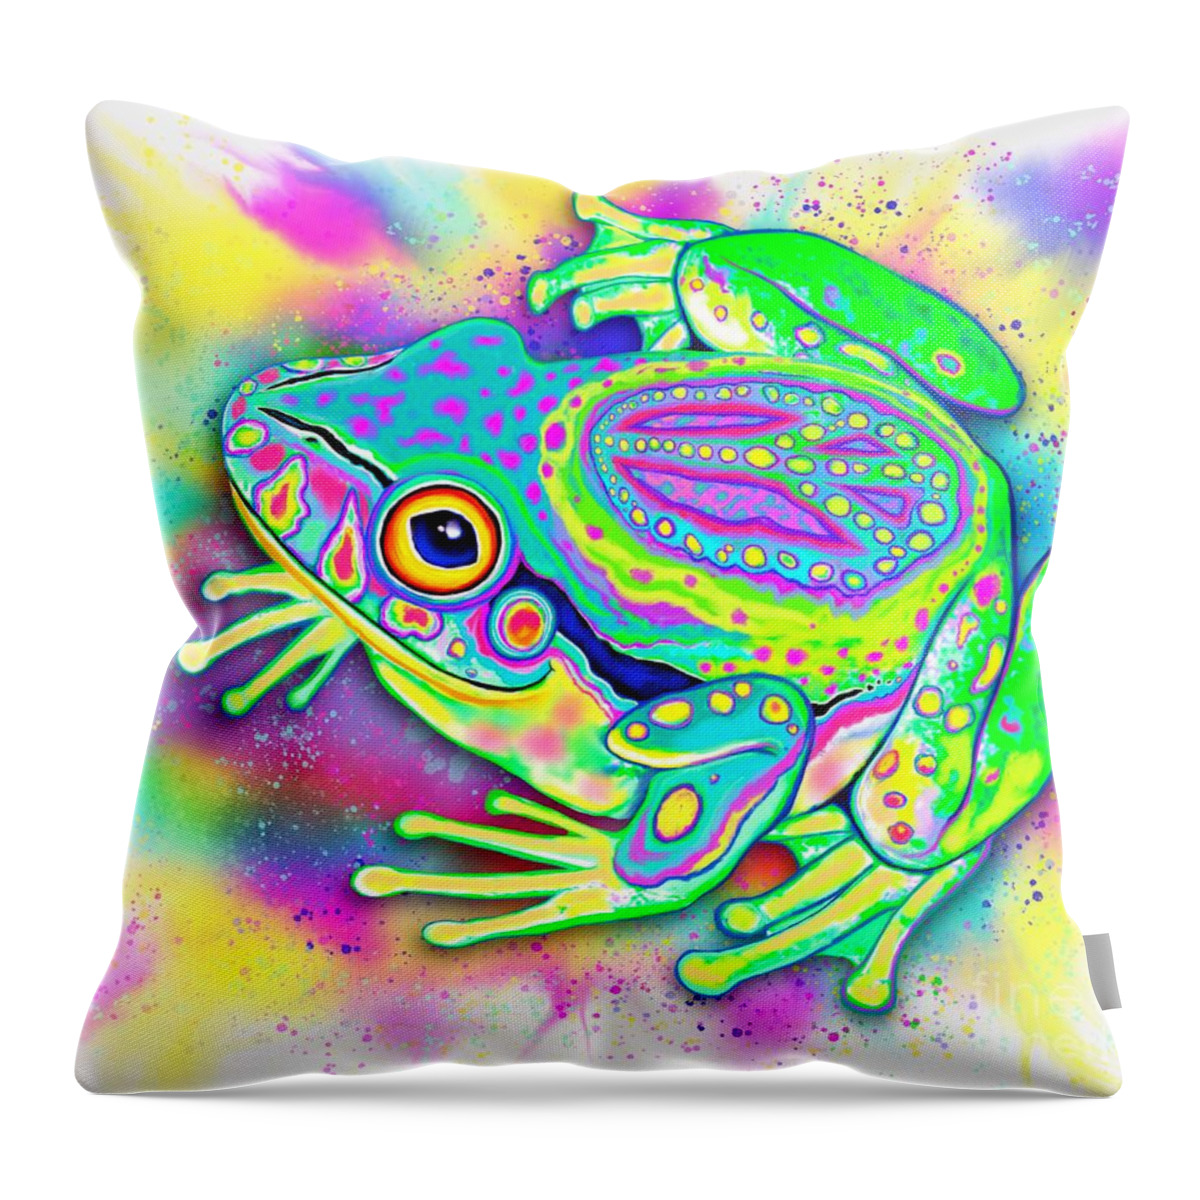 Frog Throw Pillow featuring the digital art Rainbow Color Peace Frog by Nick Gustafson